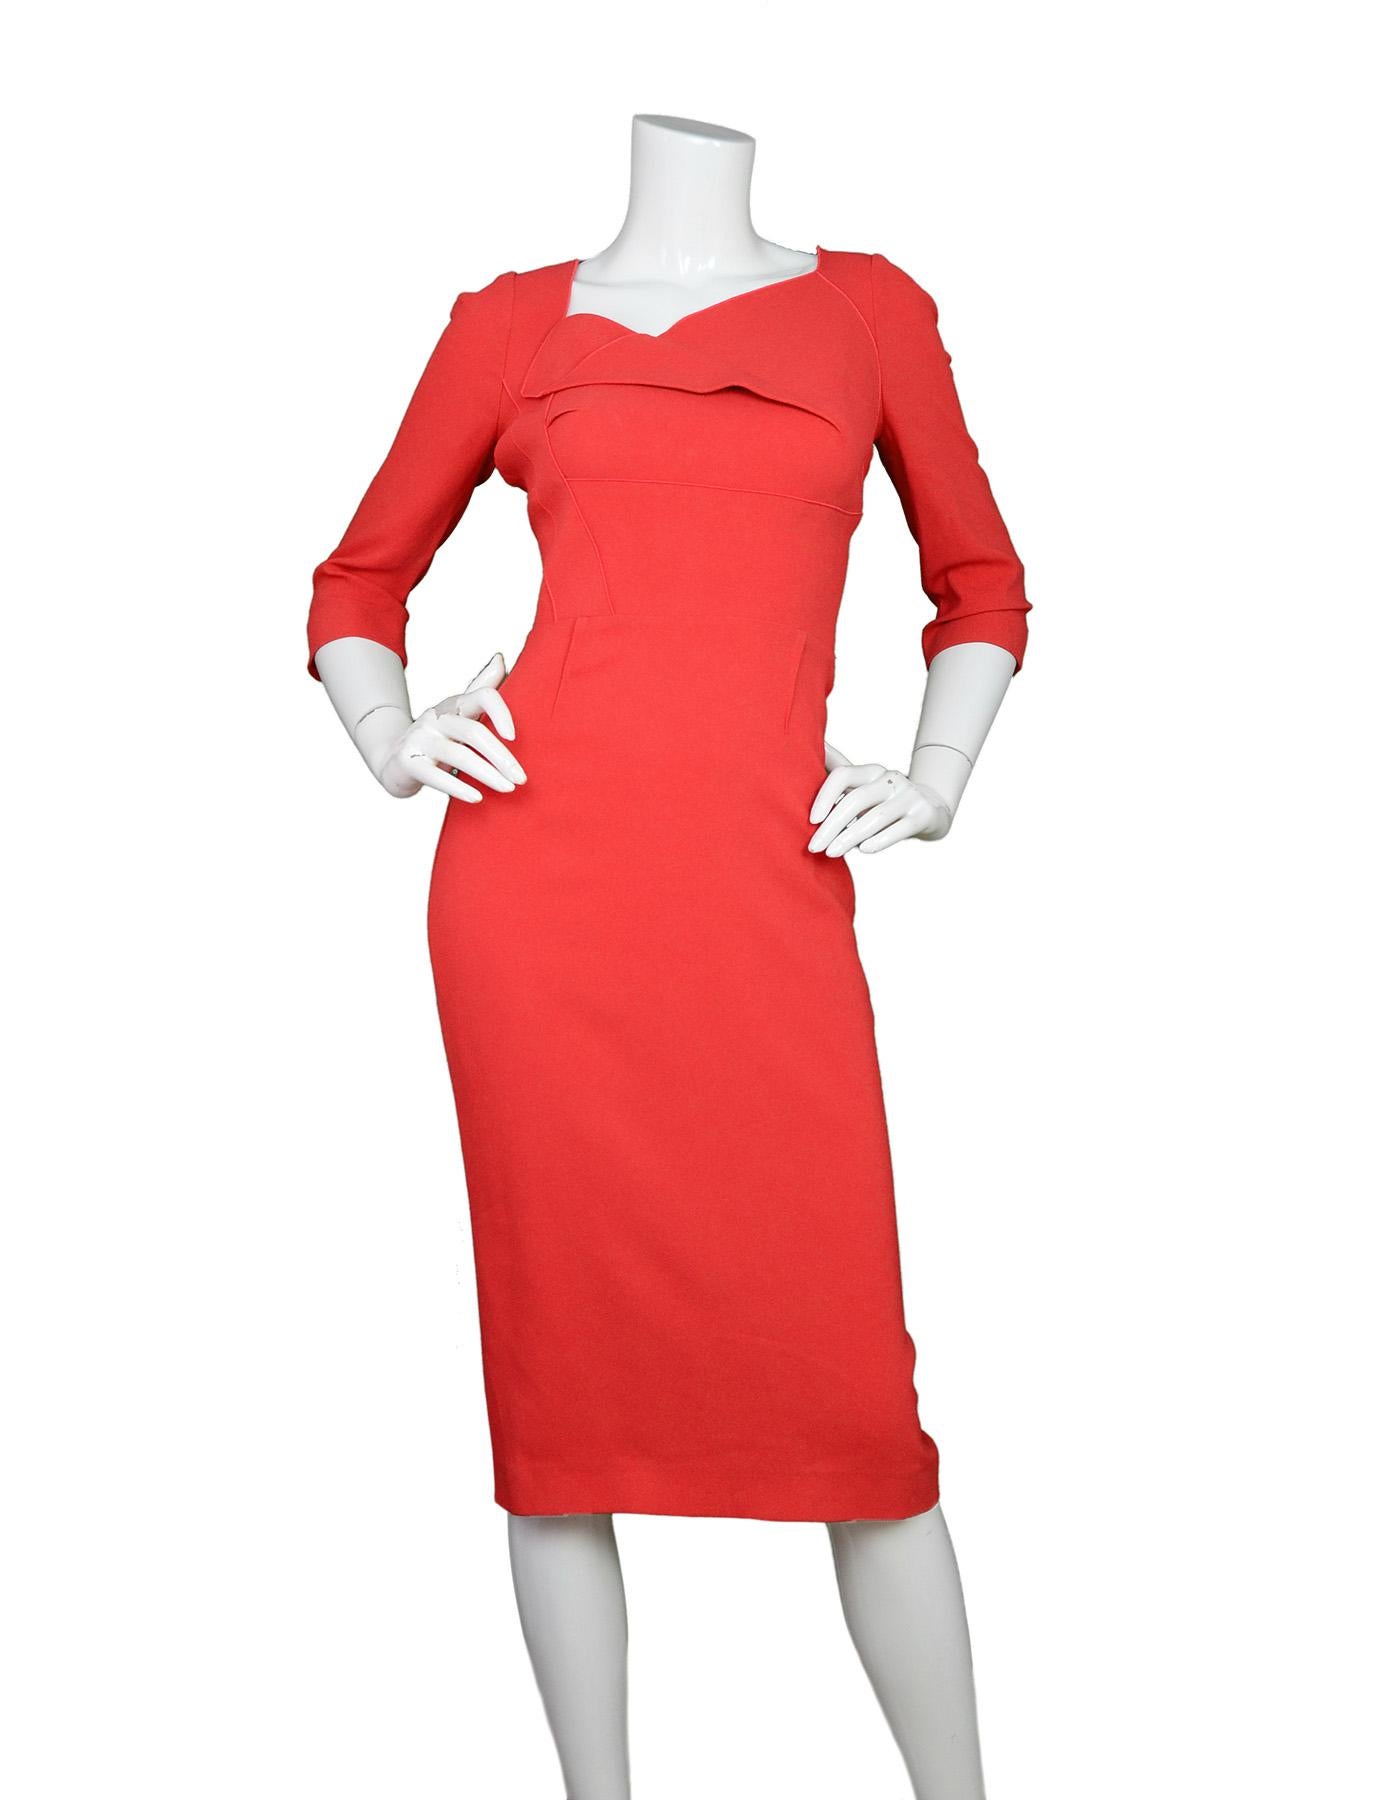 Roland Mouret Red 3/4 Sleeve Asymmetrical Neckline Dress With Black Bow Tie at Neck Sz 10

Made In: France
Color: Red
Materials: 63% Viscose, 34% acetate, 3% Elastane
Opening/Closure: Full back zipper
Overall Condition: Excellent pre-owned condition